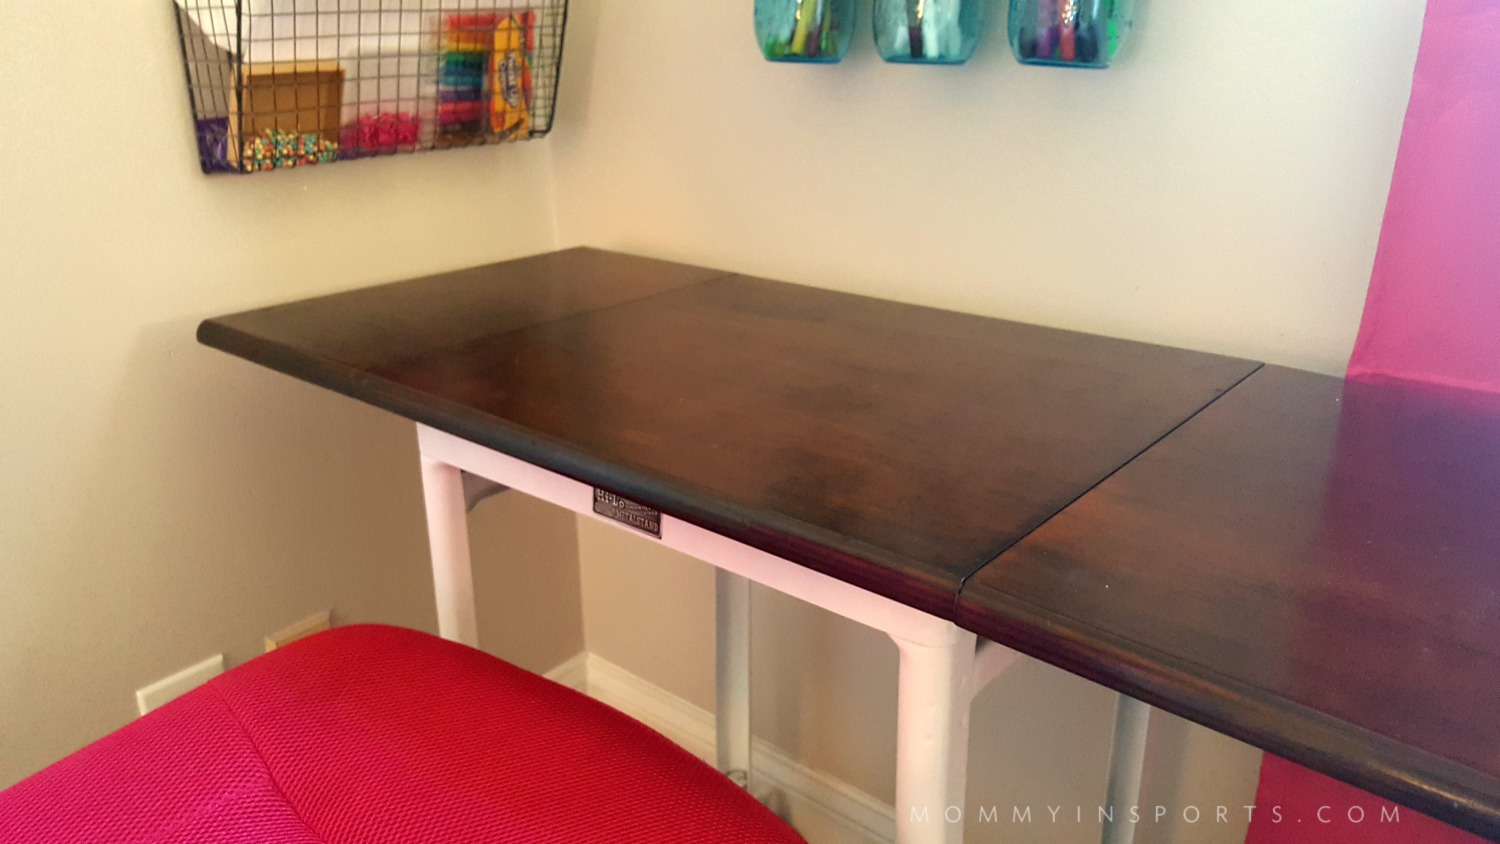 Upcycle a vintage typewriter table into a super cute kid's desk in an afternoon. Don't spend big bucks when you can make something old beautiful and new again! The perfect project, this DIY upcycled vintage typewriter table!